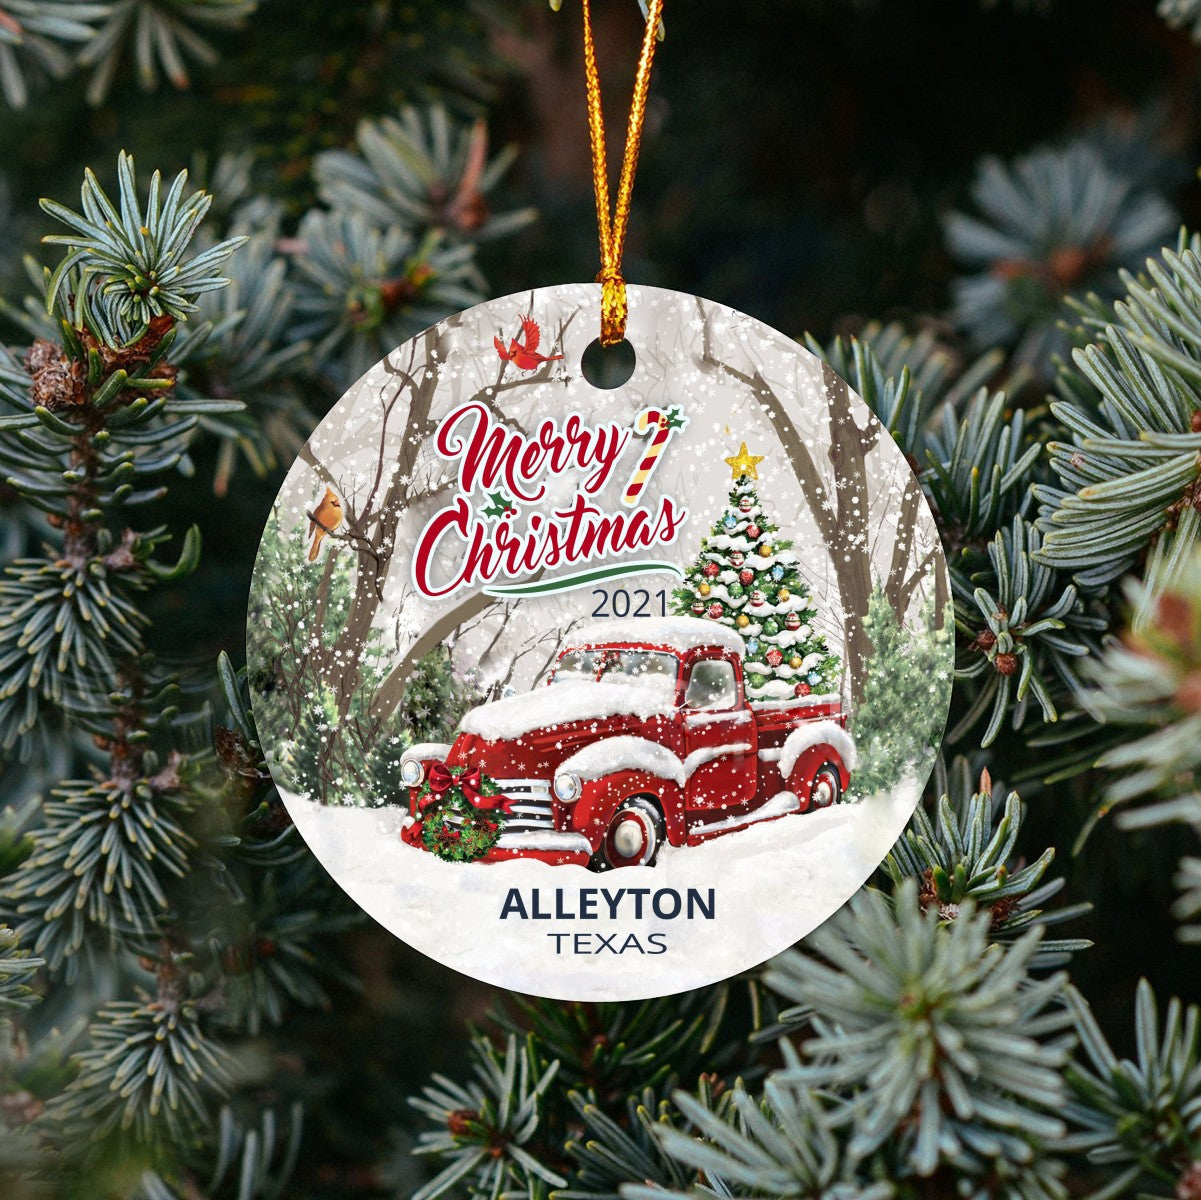 Christmas Tree Ornaments Alleyton - Ornament With Name City, State Alleyton Texas TX Ornament - Red Truck Xmas Ornaments 3'' Plastic Gift For Family, Friend And Housewarming